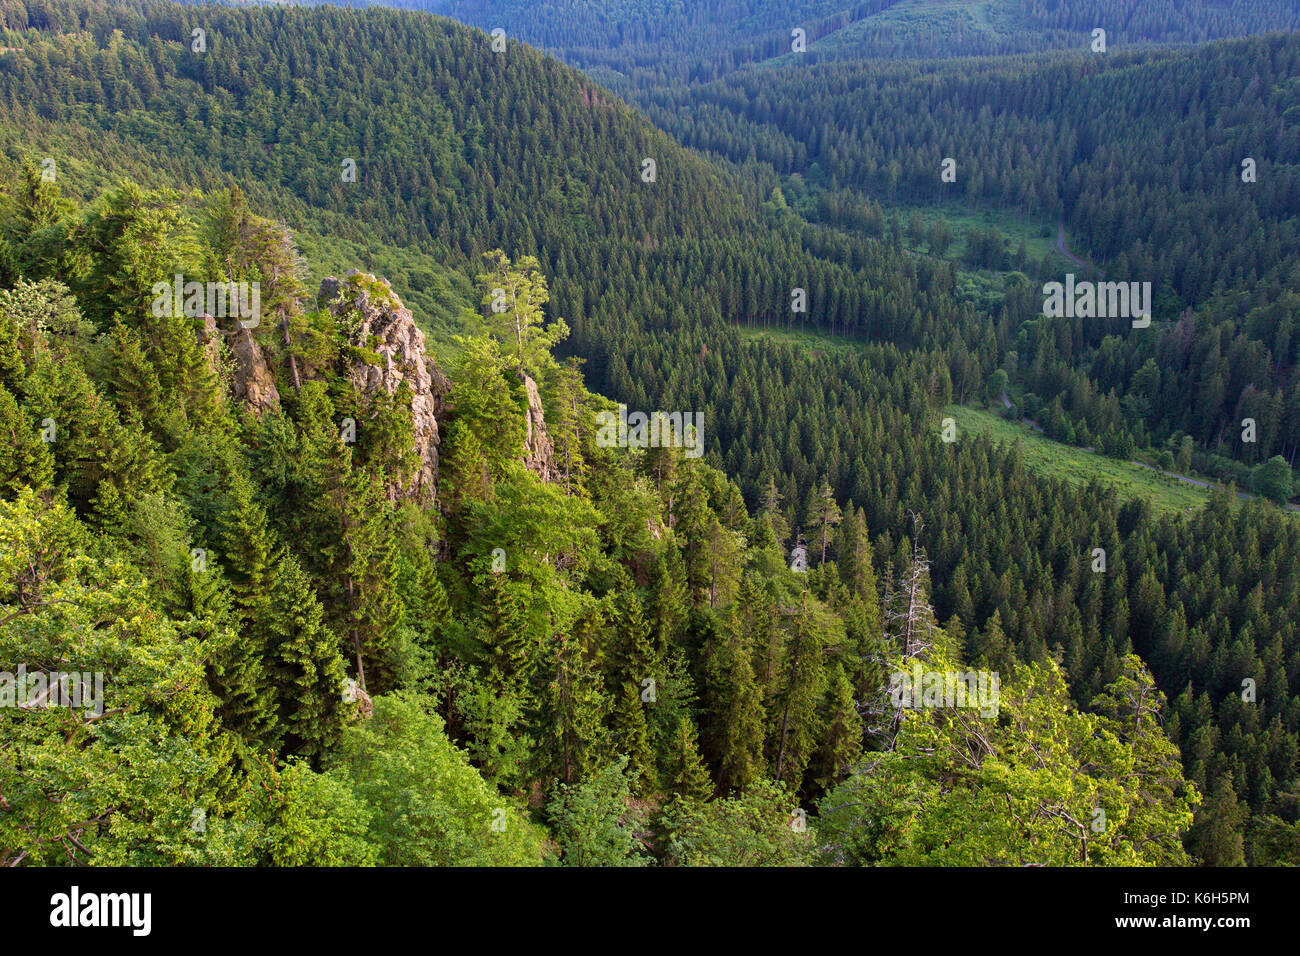 Hahnenkleeklippen / Hahnenklee Crags at Upper Harz / Oberharz in the Harz National Park, Lower Saxony, Germany Stock Photo